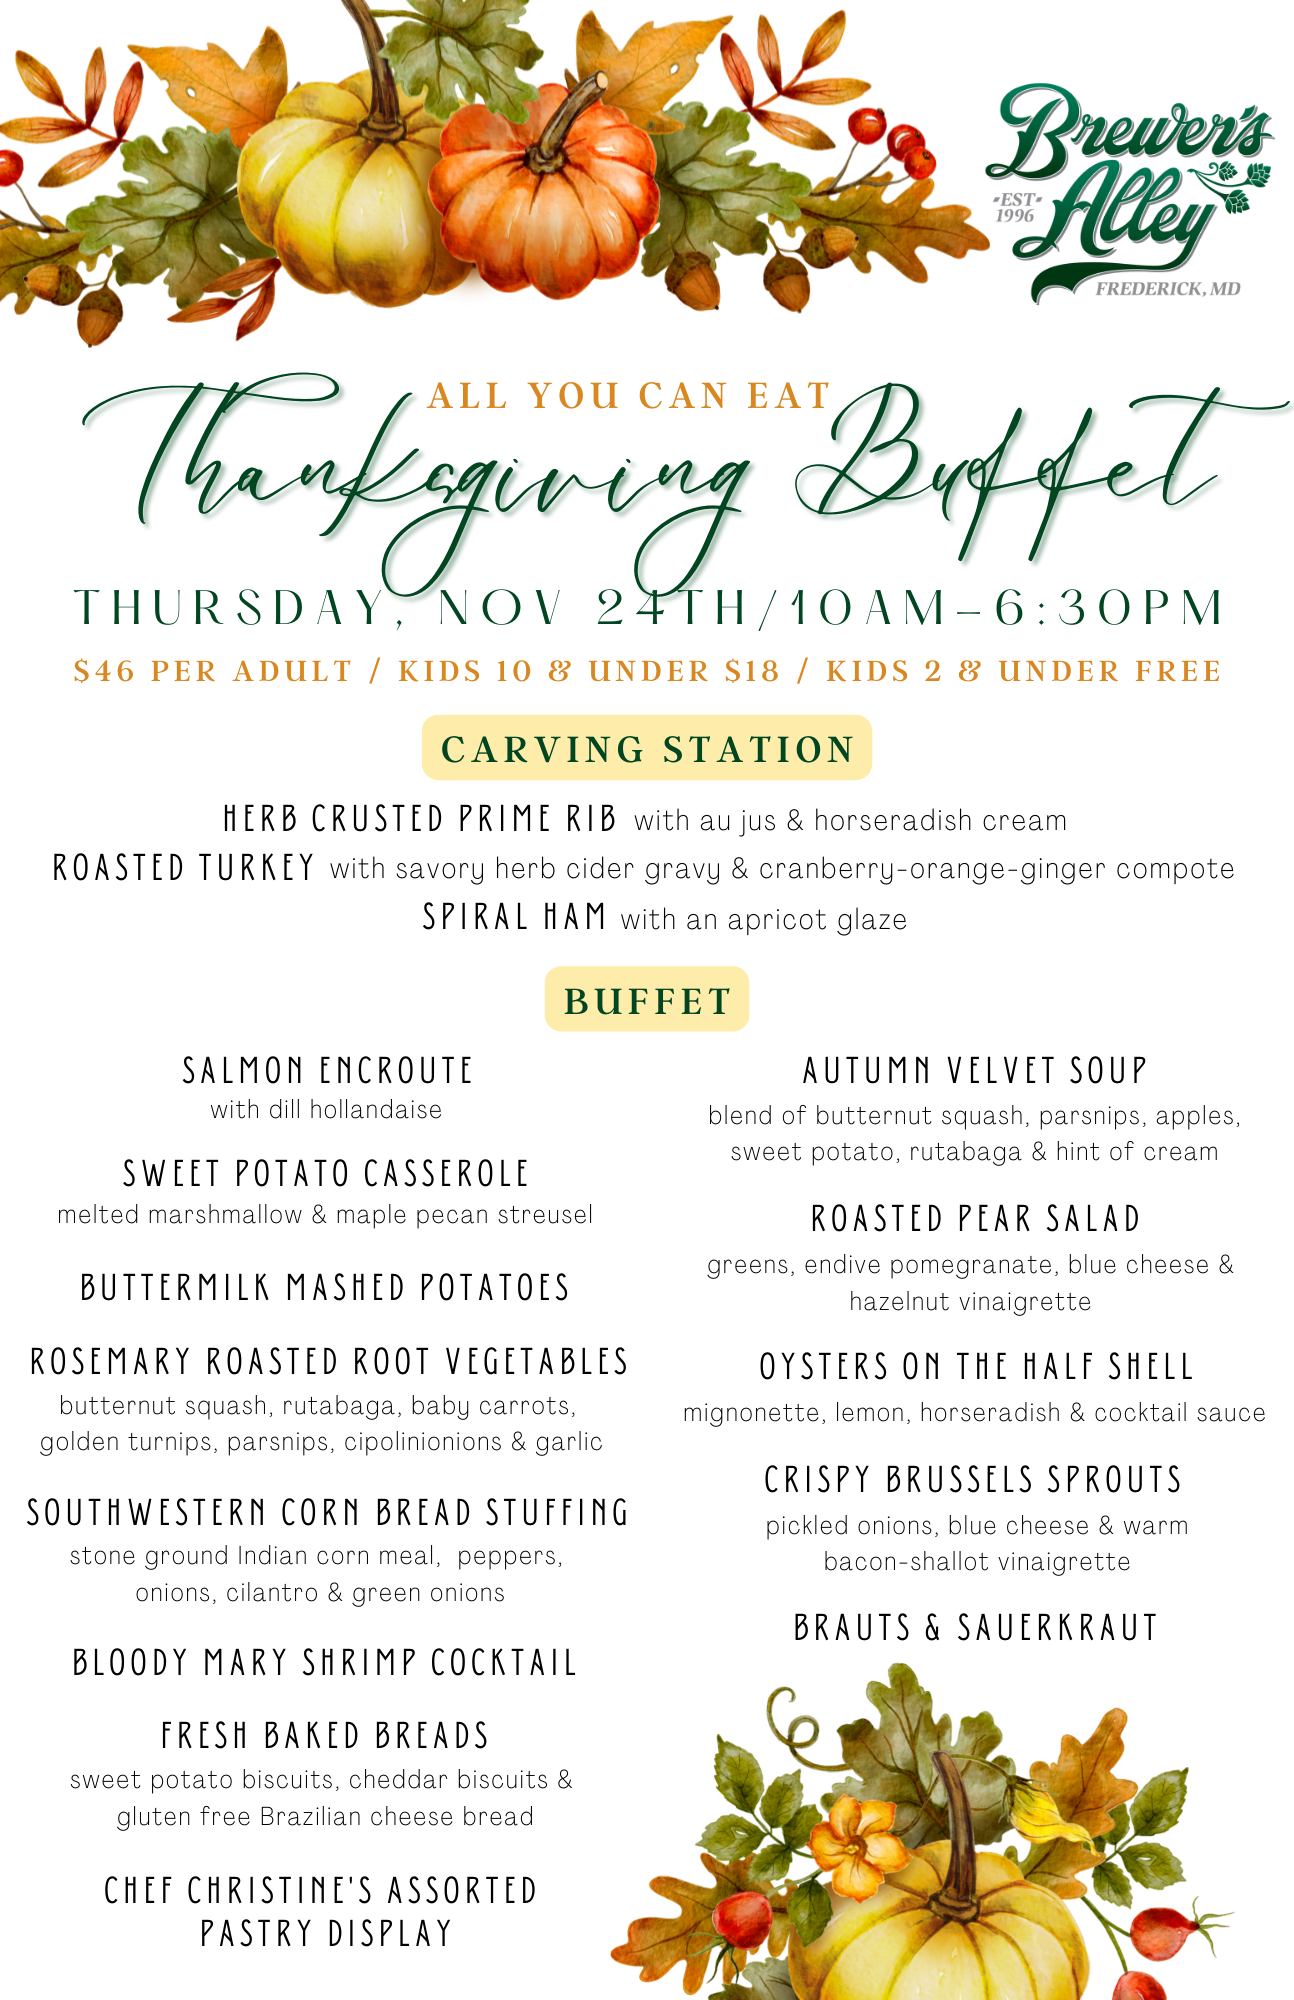 All You Can Eat Thanksgiving Buffet - Brewer's Alley